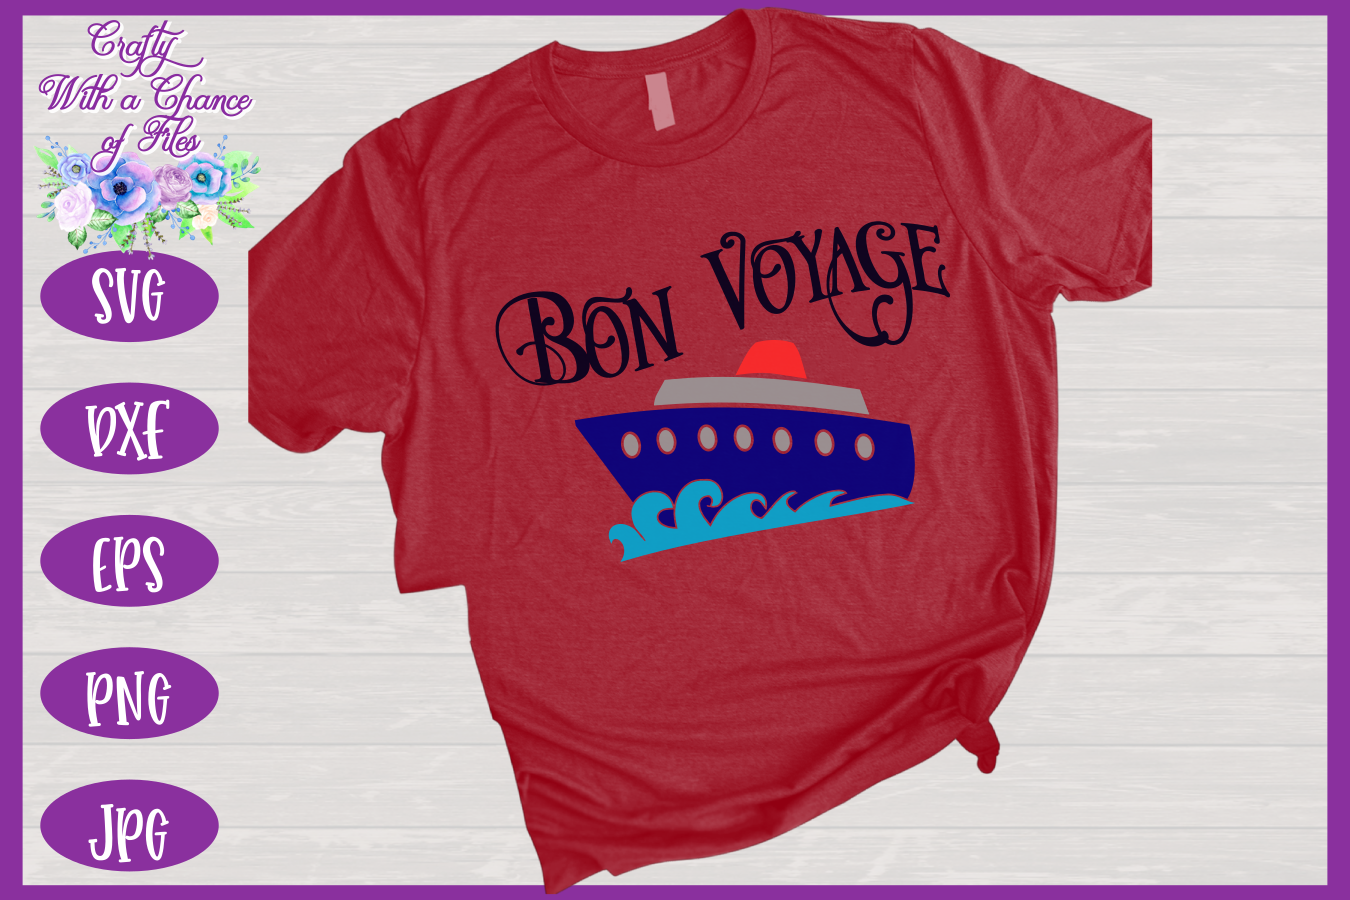 Cruise Svg Bon Voyage Svg Cruise Shirt Svg By Crafty With A Chance Of Files Thehungryjpeg Com